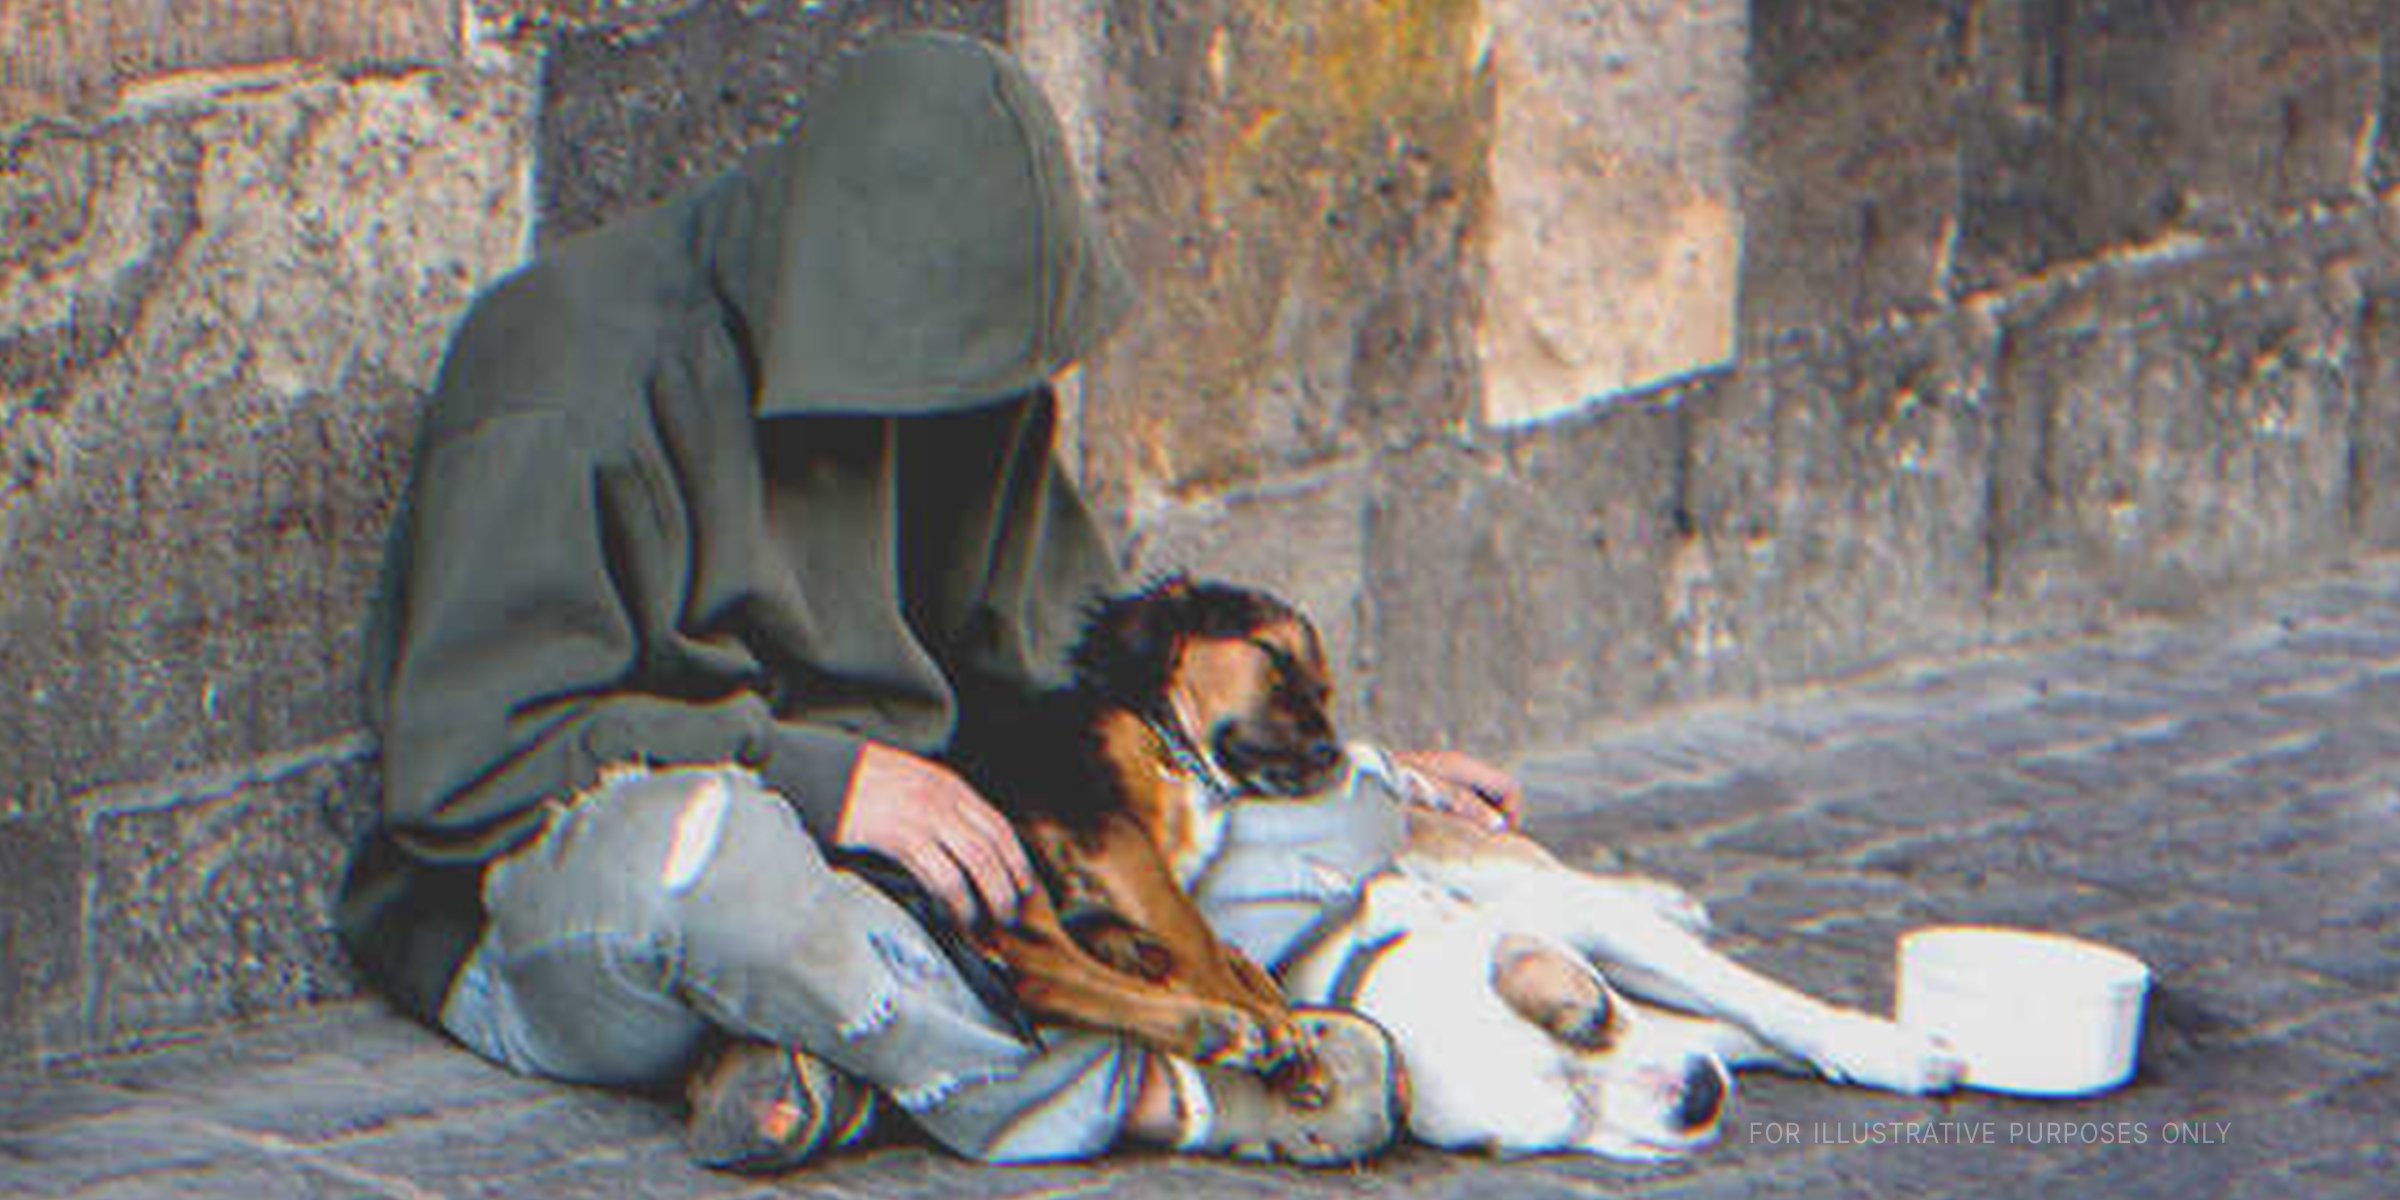 Hungry Beggar Sitting With Dogs | Source: Shuttterstock